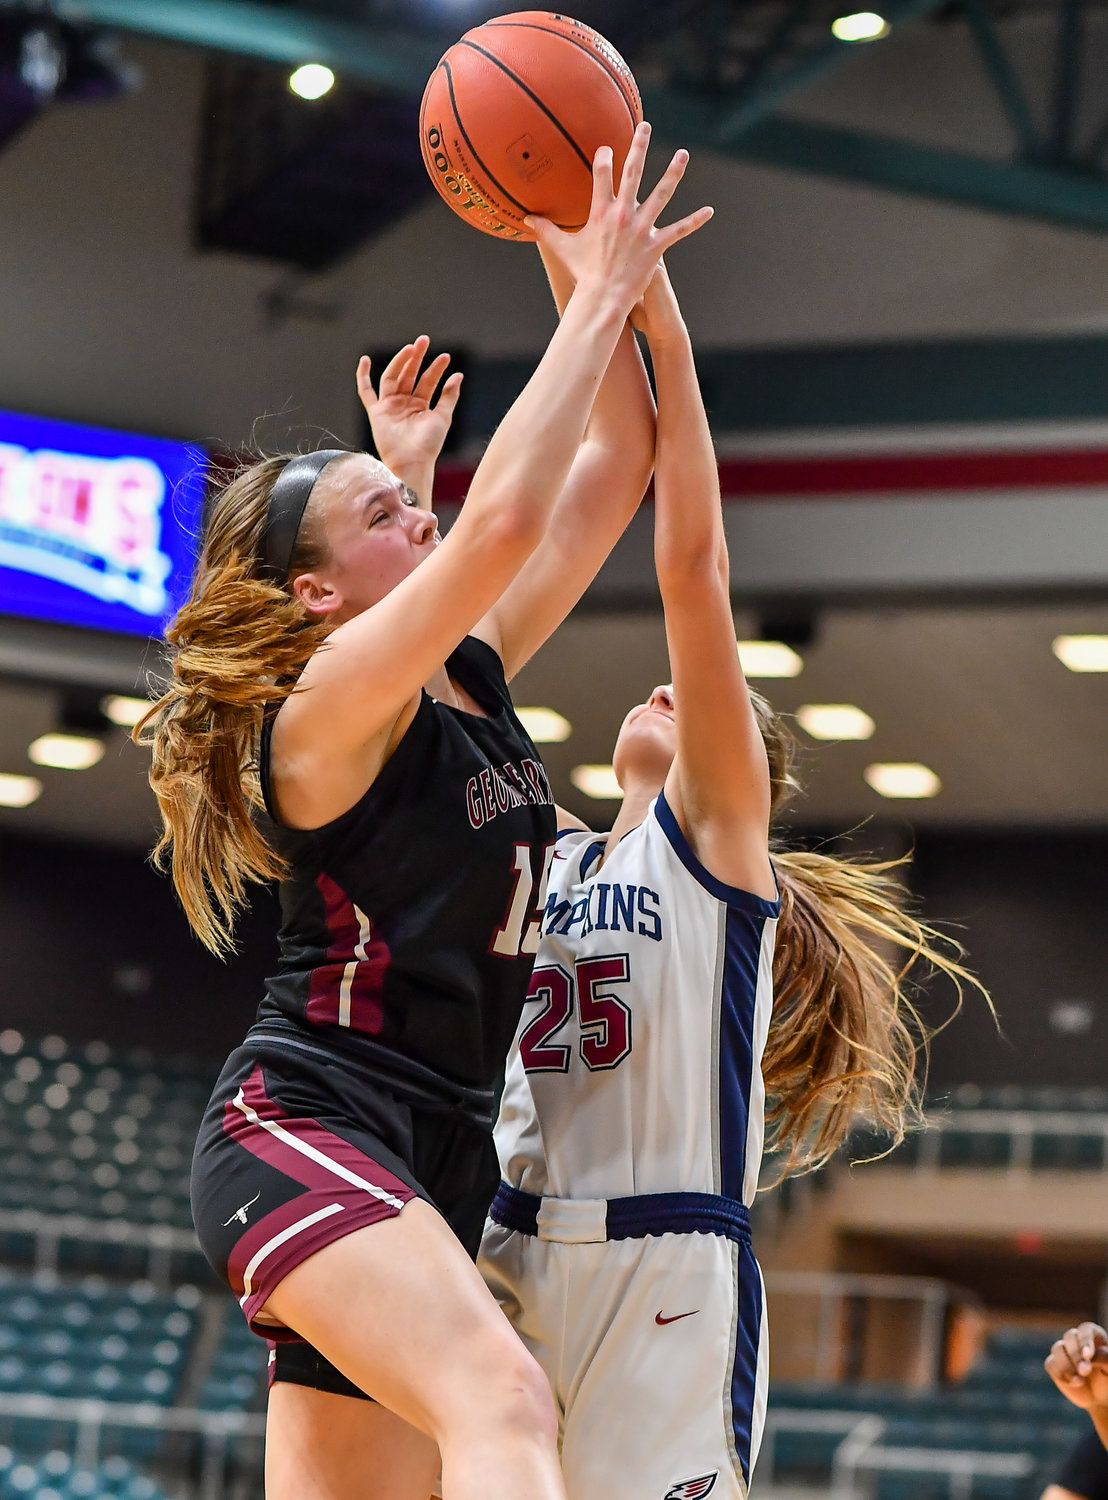 Katy Tx. Feb 15, 2022:  Tompkins Kennedy Bourque #25 and George Ranch's Lauren Stevens #15 battle for the rebound during the Bi-District playoff, Tompkins vs George Ranch. (Photo by Mark Goodman / Katy Times)